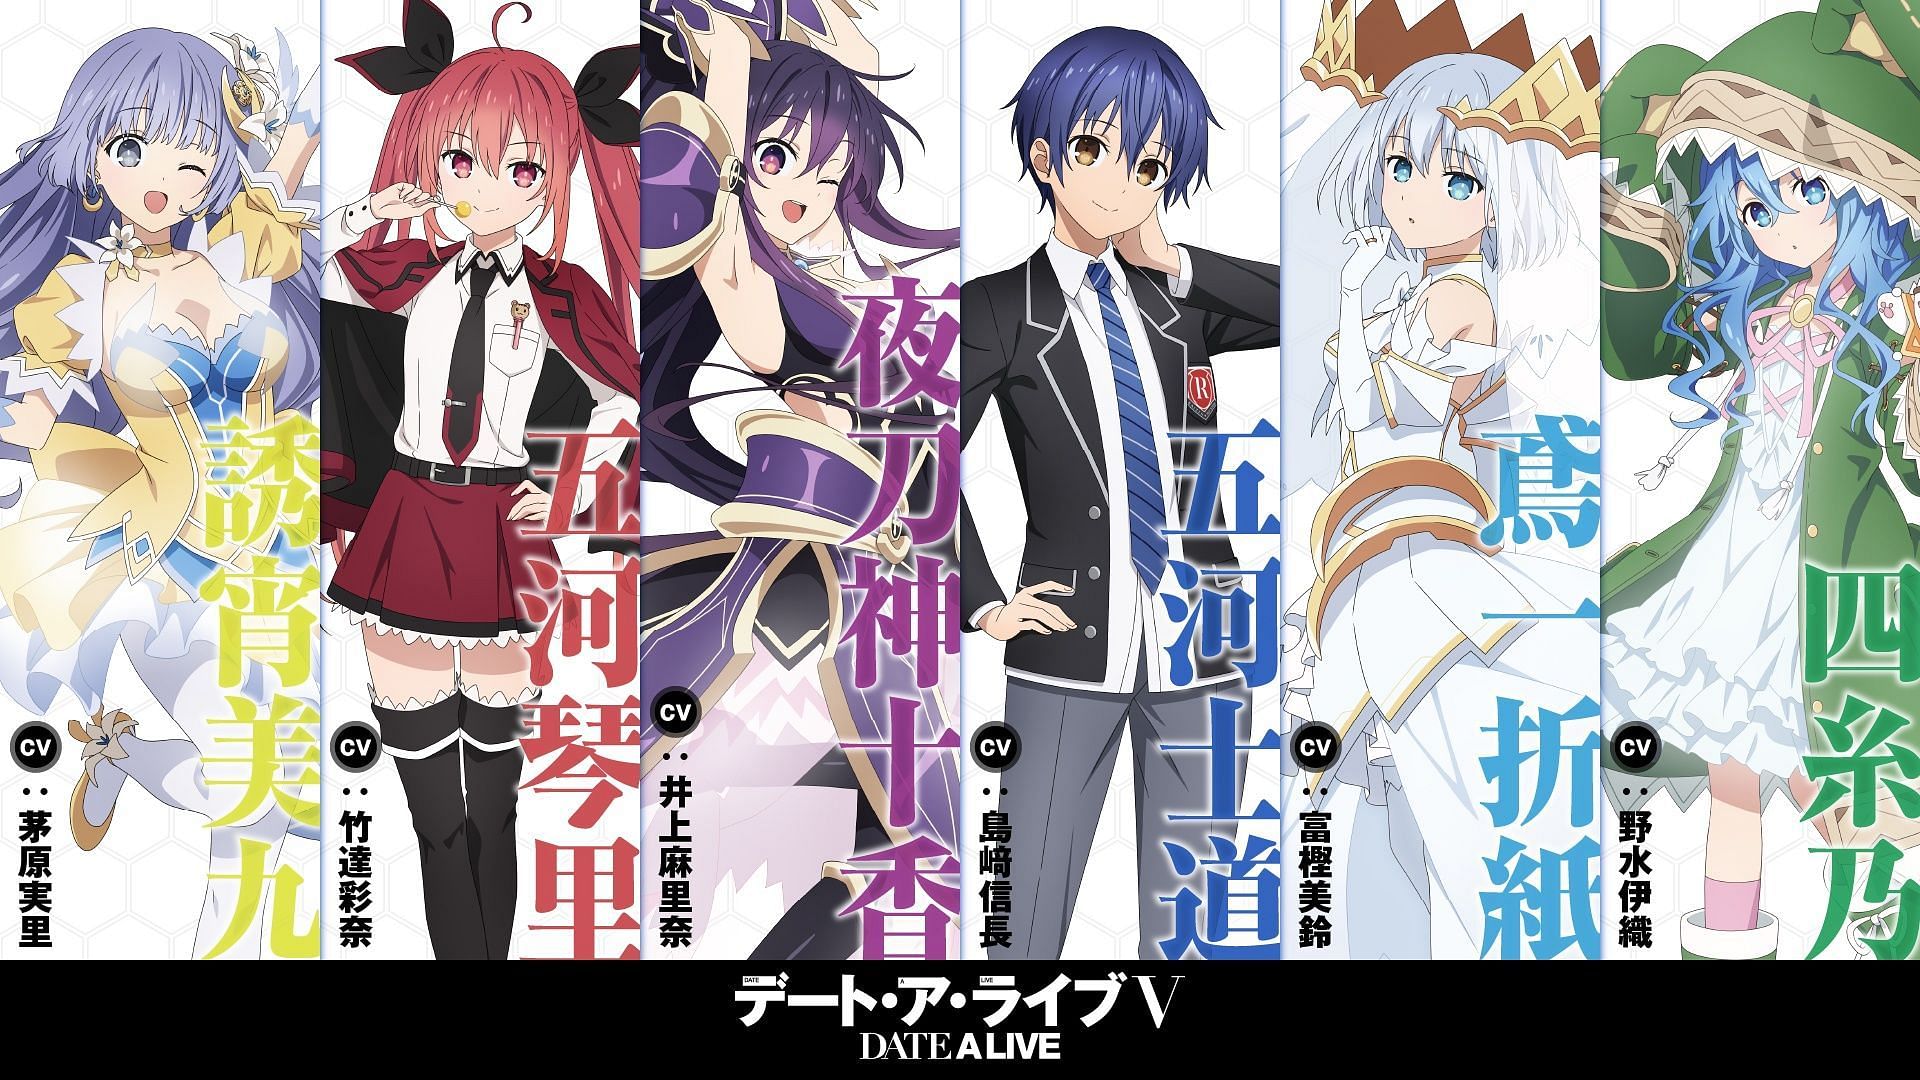 Date a live characters